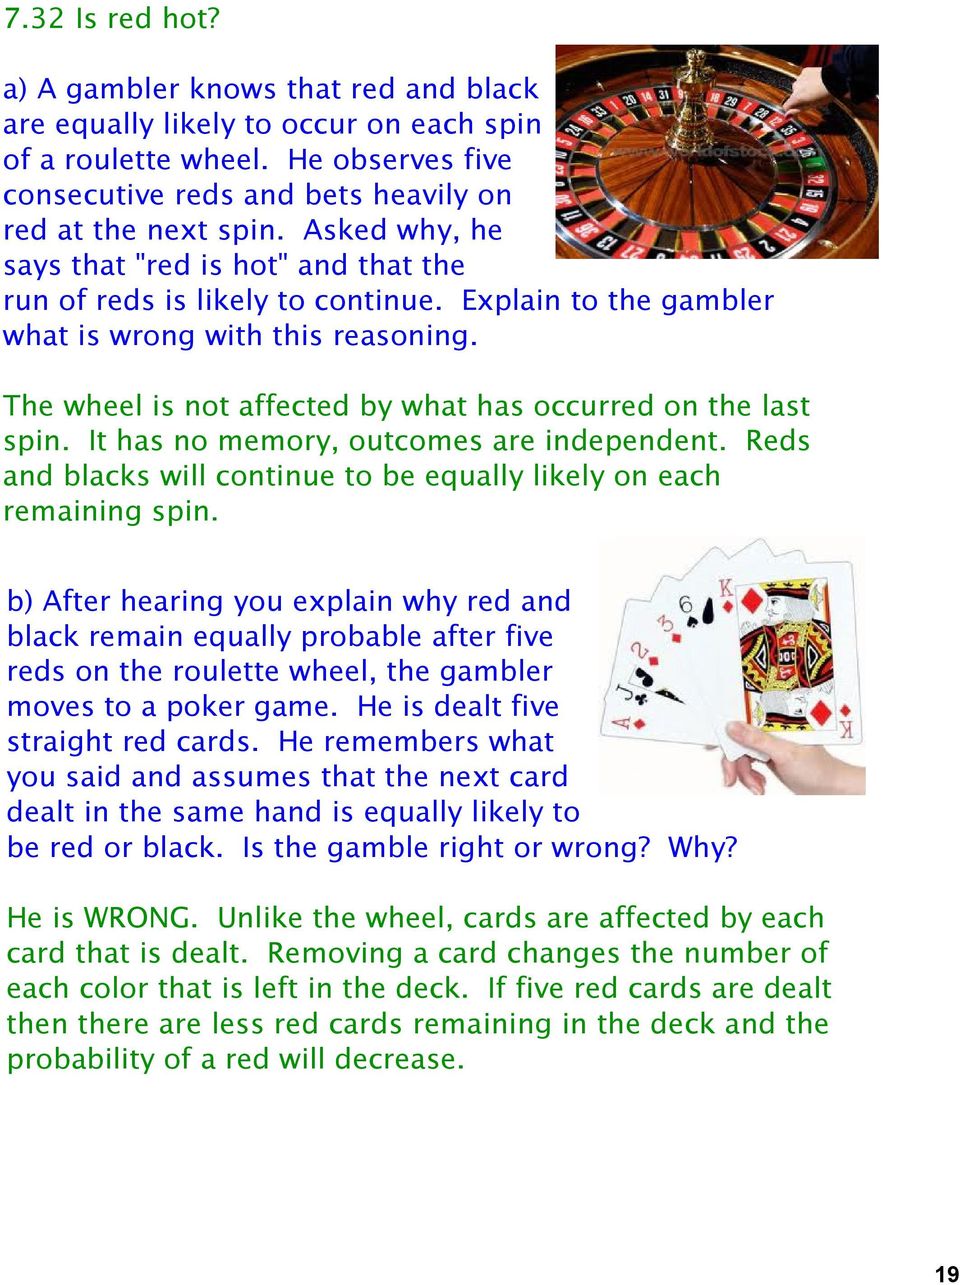 The wheel is not affected by what has occurred on the last spin. It has no memory, outcomes are independent. Reds and blacks will continue to be equally likely on each remaining spin.